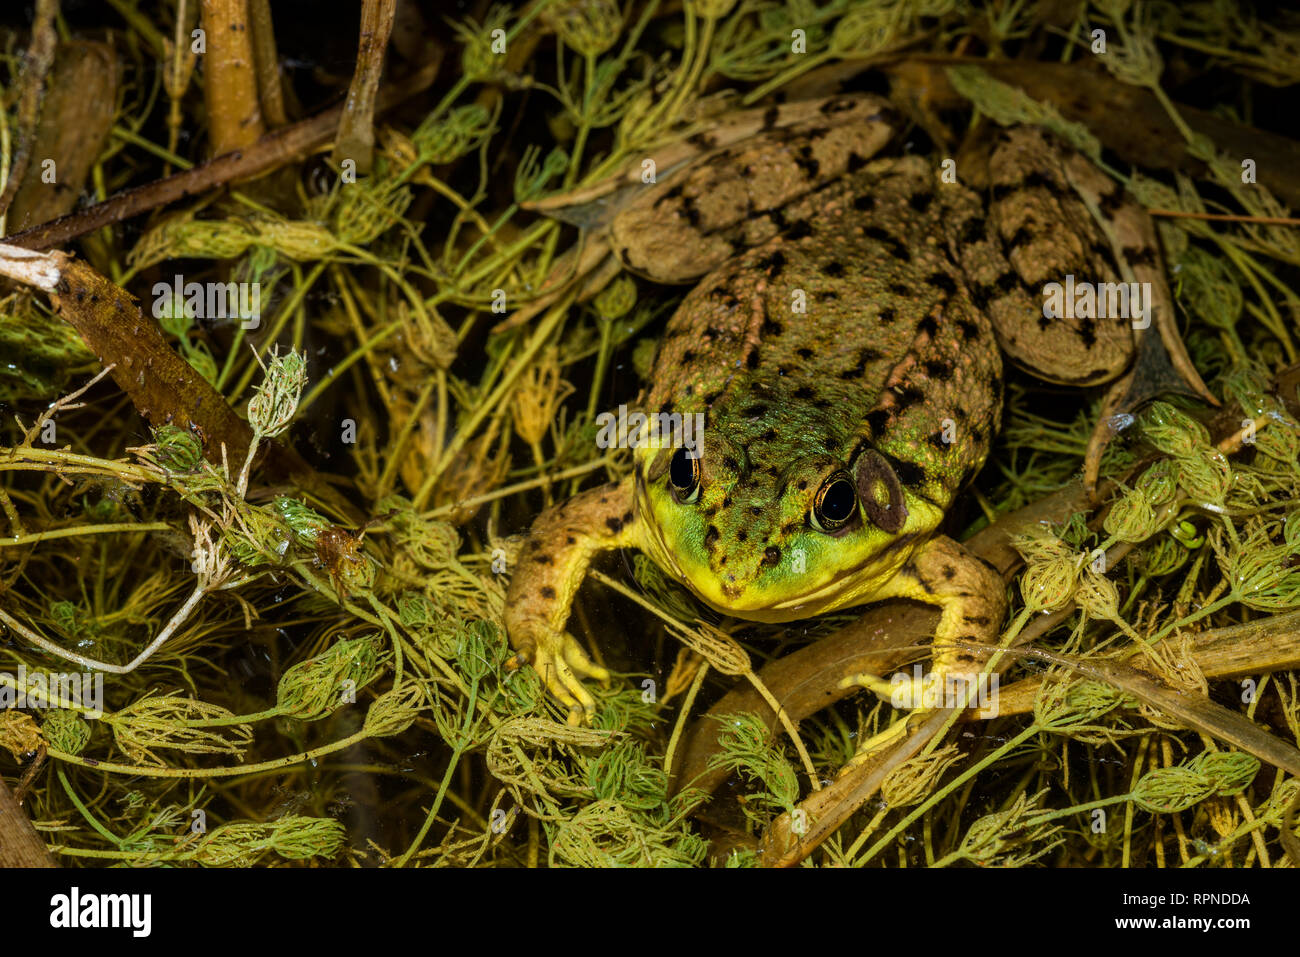 zoology / animals, amphibian (amphibia), Green Frog (Rana clamitans) in wetland at night near Thornton, Additional-Rights-Clearance-Info-Not-Available Stock Photo